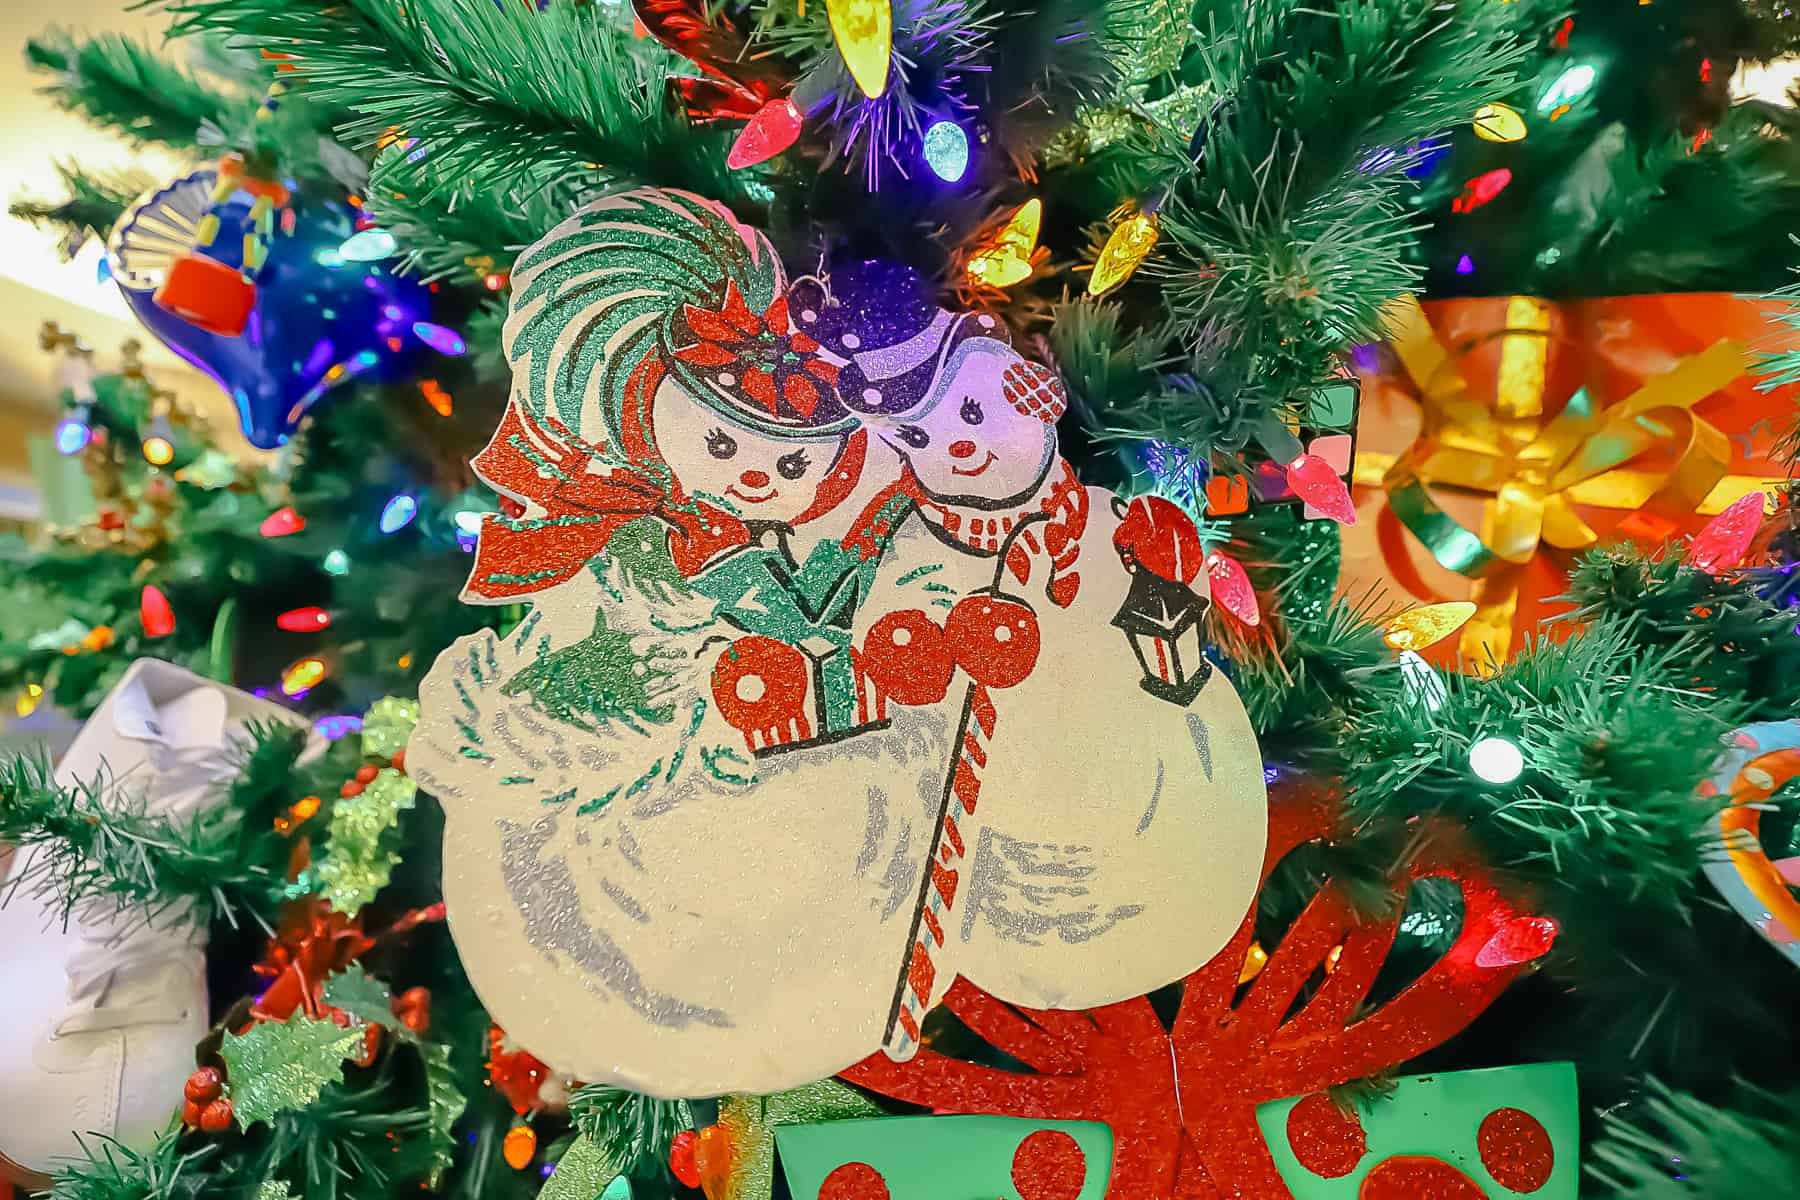 Mr. and Mrs. Snowman ornaments in the tree at Pop Century 